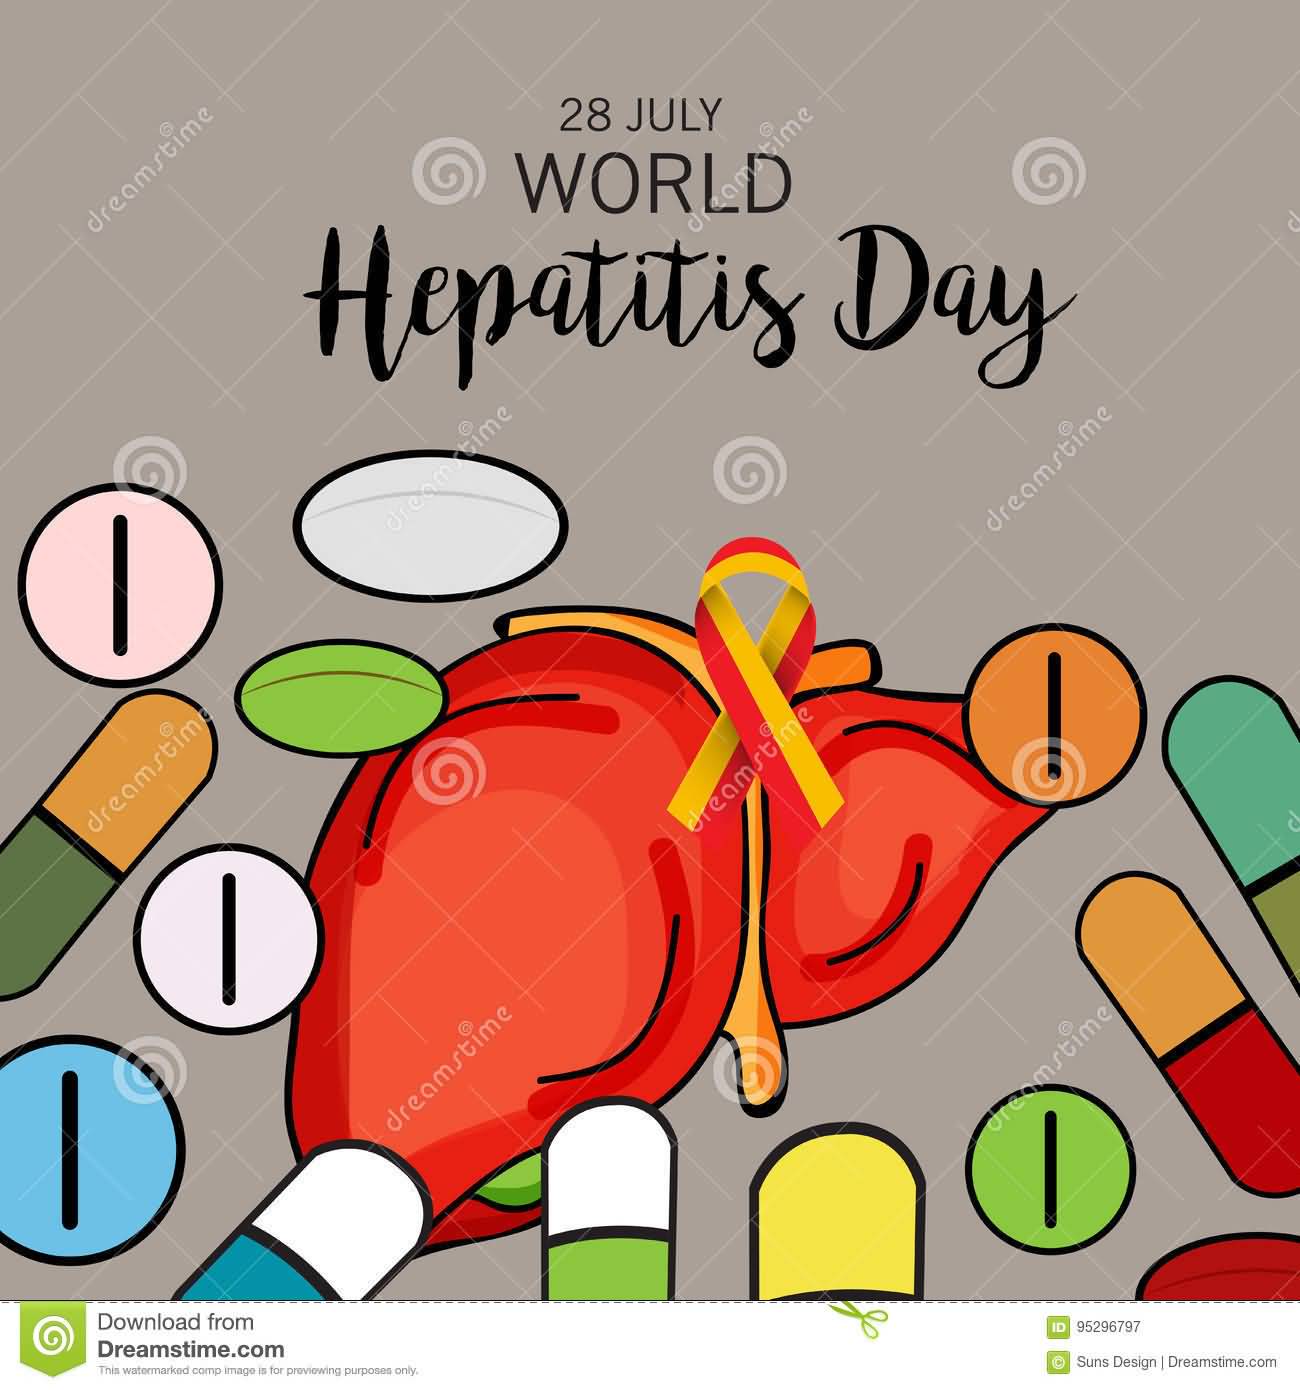 28 July World Hepatitis Day Liver With Pills Illustration